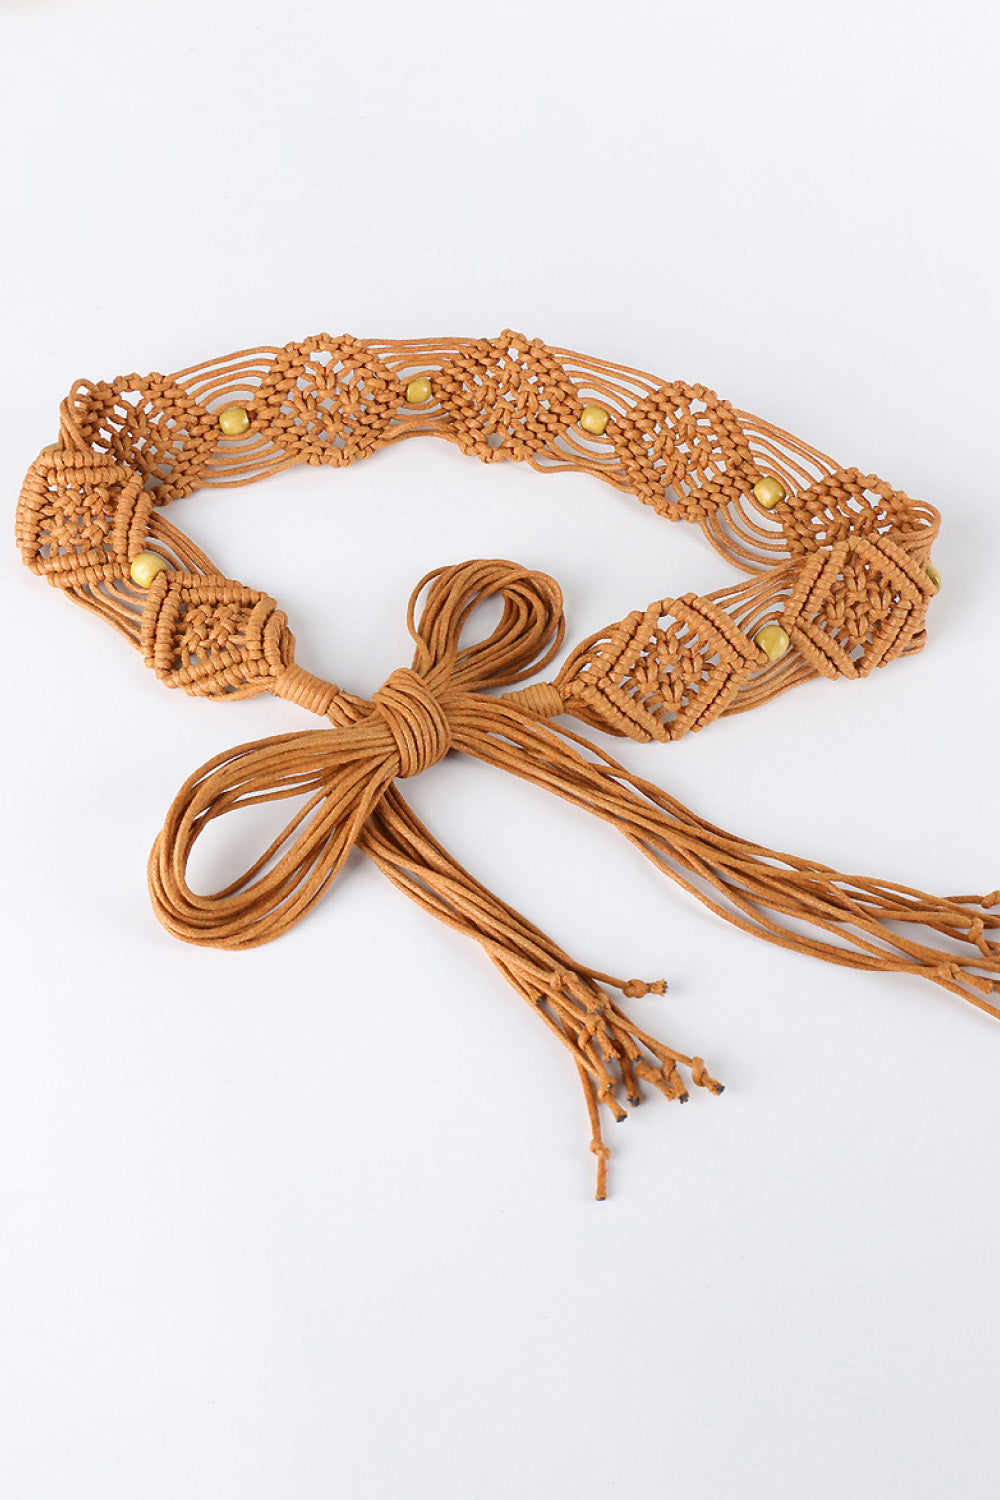 Brown braid belt with fringes solid wood beads, and macrame style braid